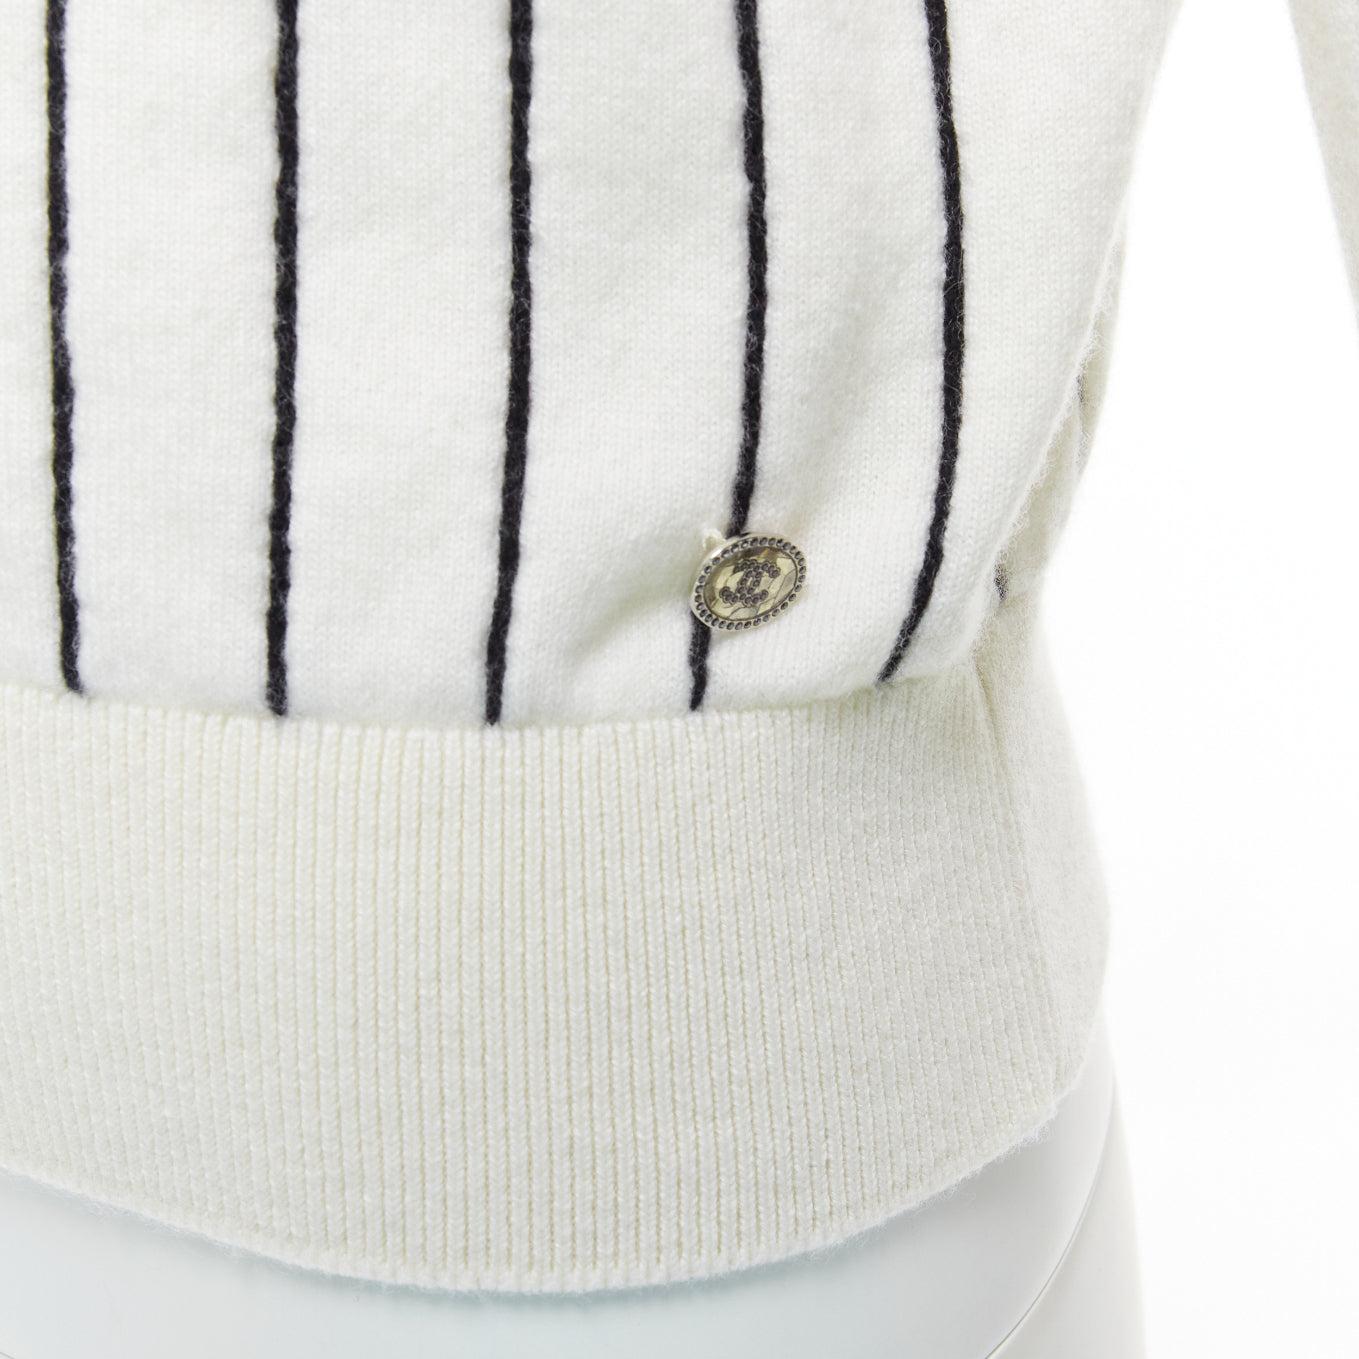 CHANEL 2023 100% cashmere cream black striped logo varsity sweater top FR36 S
Reference: MAFK/A00011
Brand: Chanel
Designer: Virginie Viard
Collection: SS 2023
Material: Cashmere
Color: White, Black
Pattern: Striped
Closure: Slip On
Extra Details: